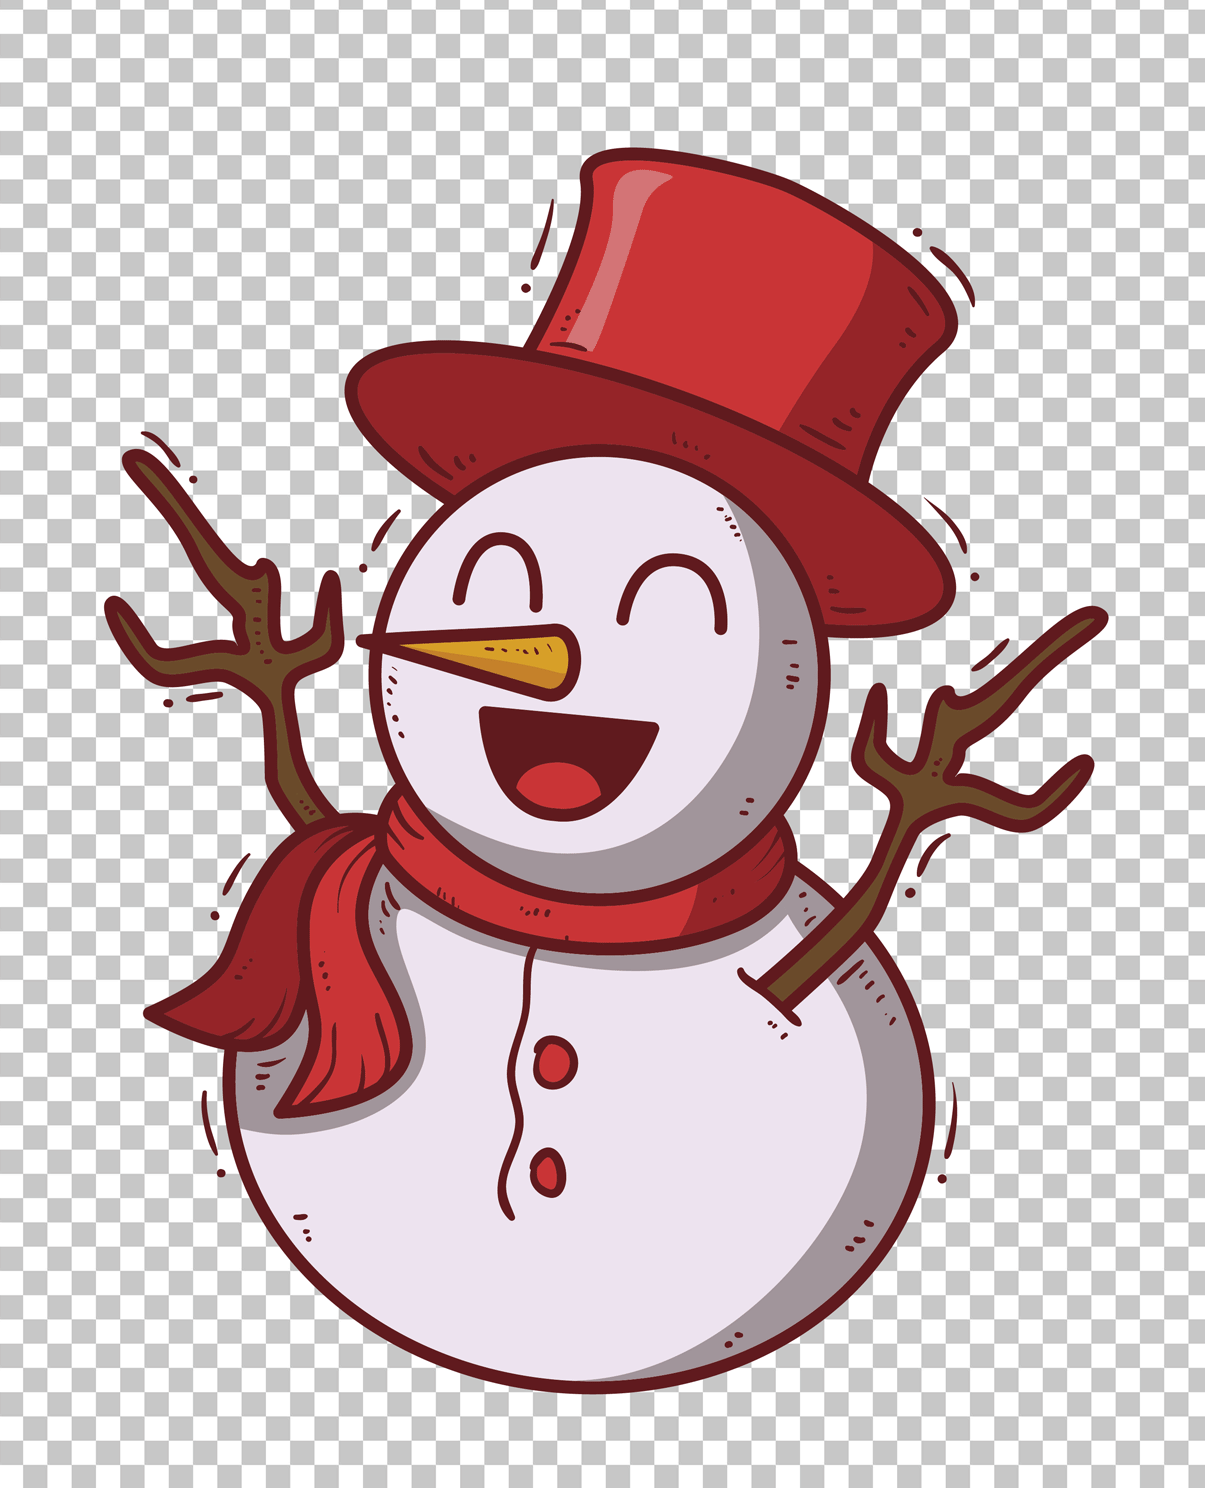 Cartoon Snowman wearing a red hat and scarf PNG Image